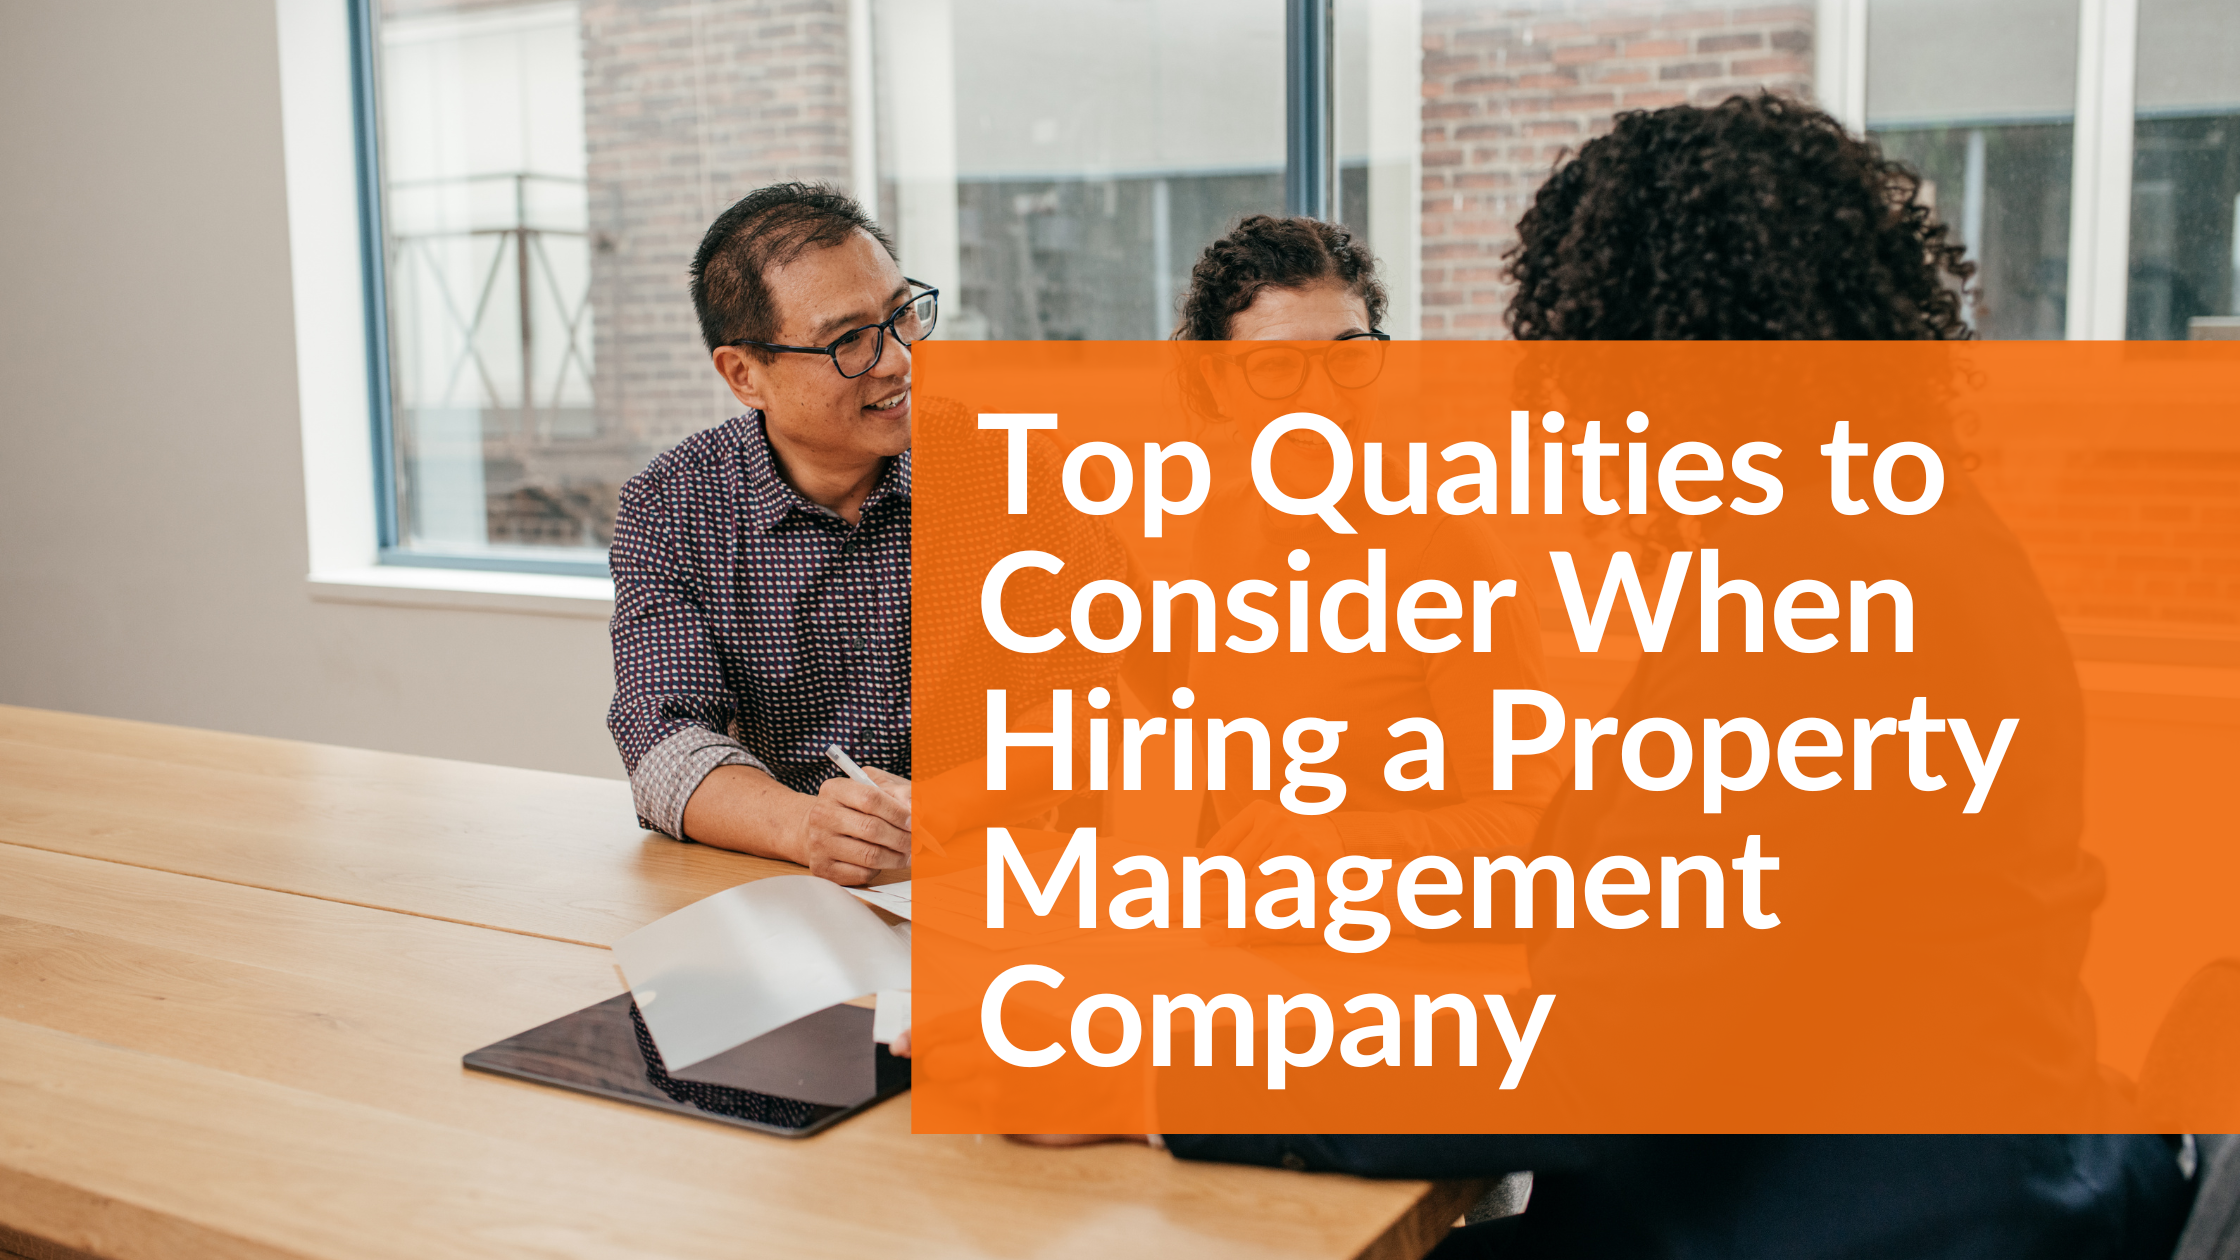 Top Qualities to Consider When Hiring a Property Management Company